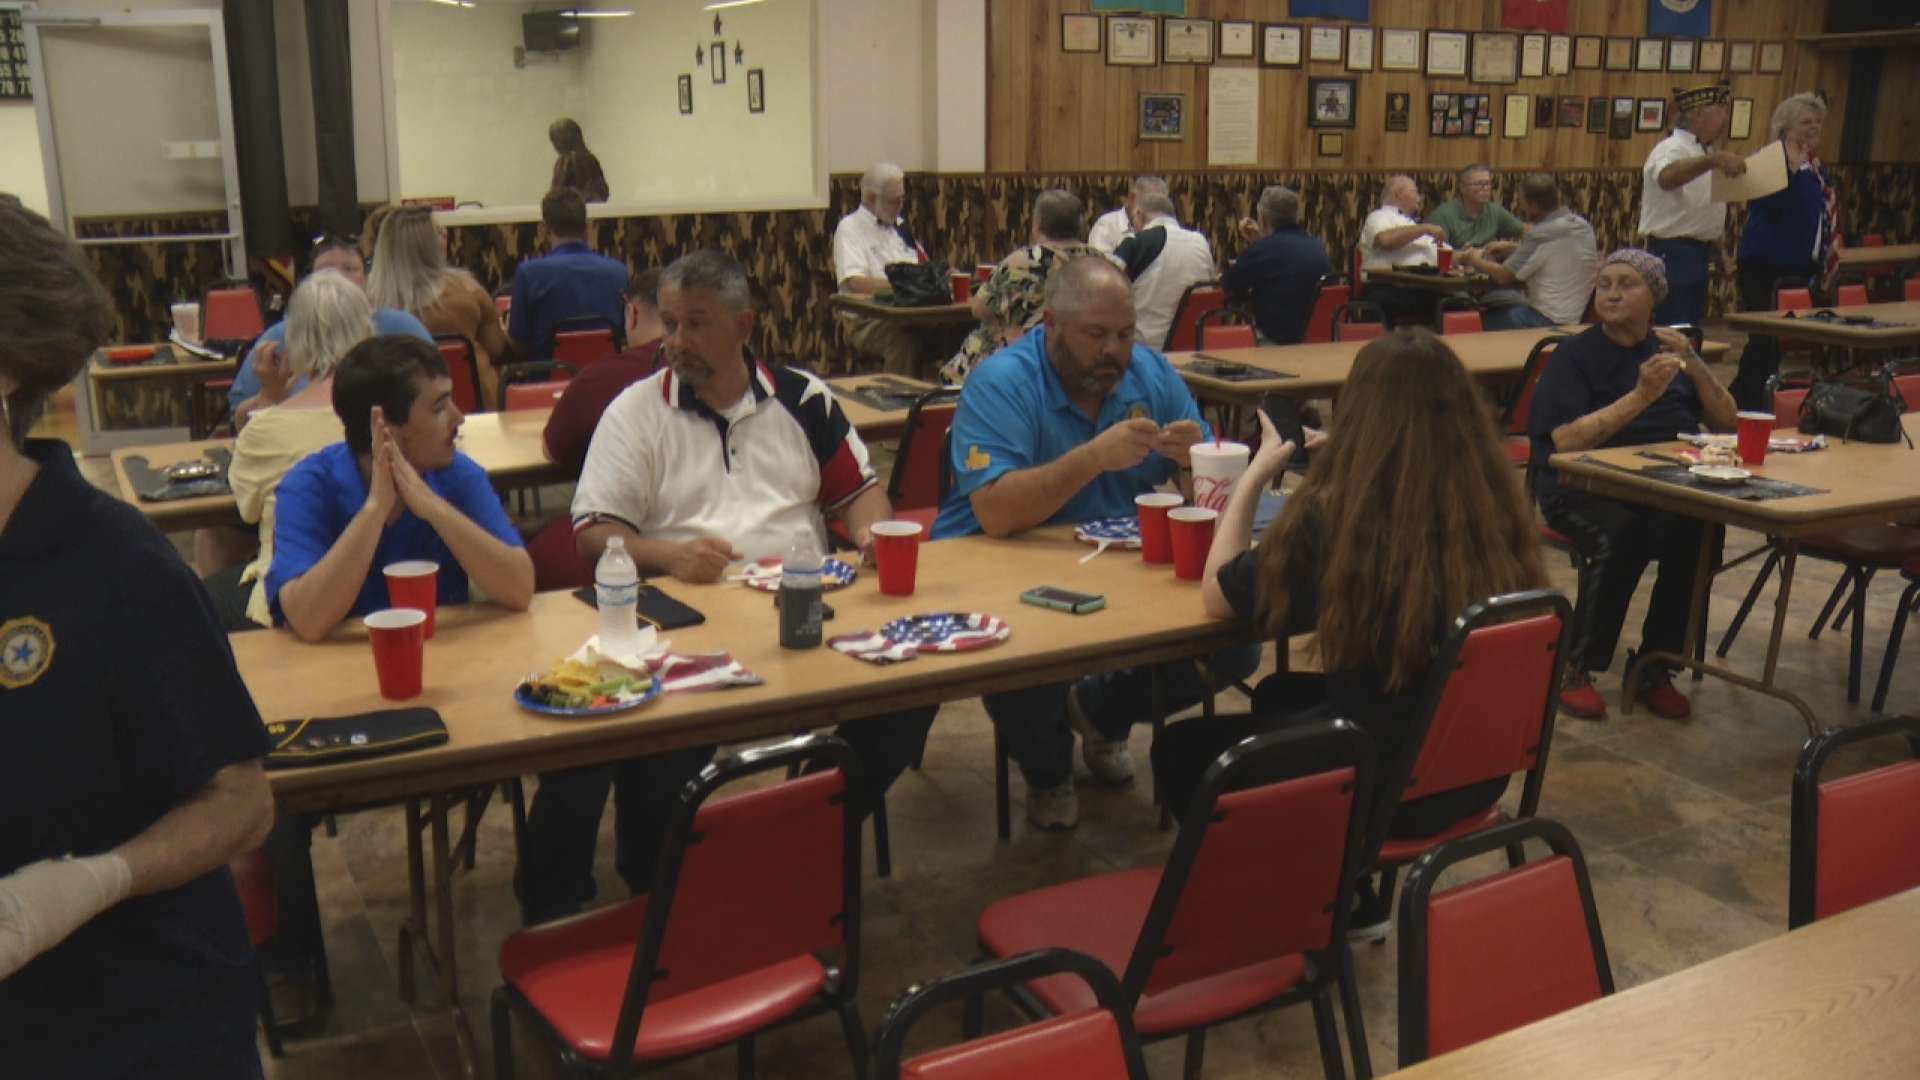 American Legion Post 55 in Belton has been serving veterans and their families in Bell County since the organization was first chartered in 1919.